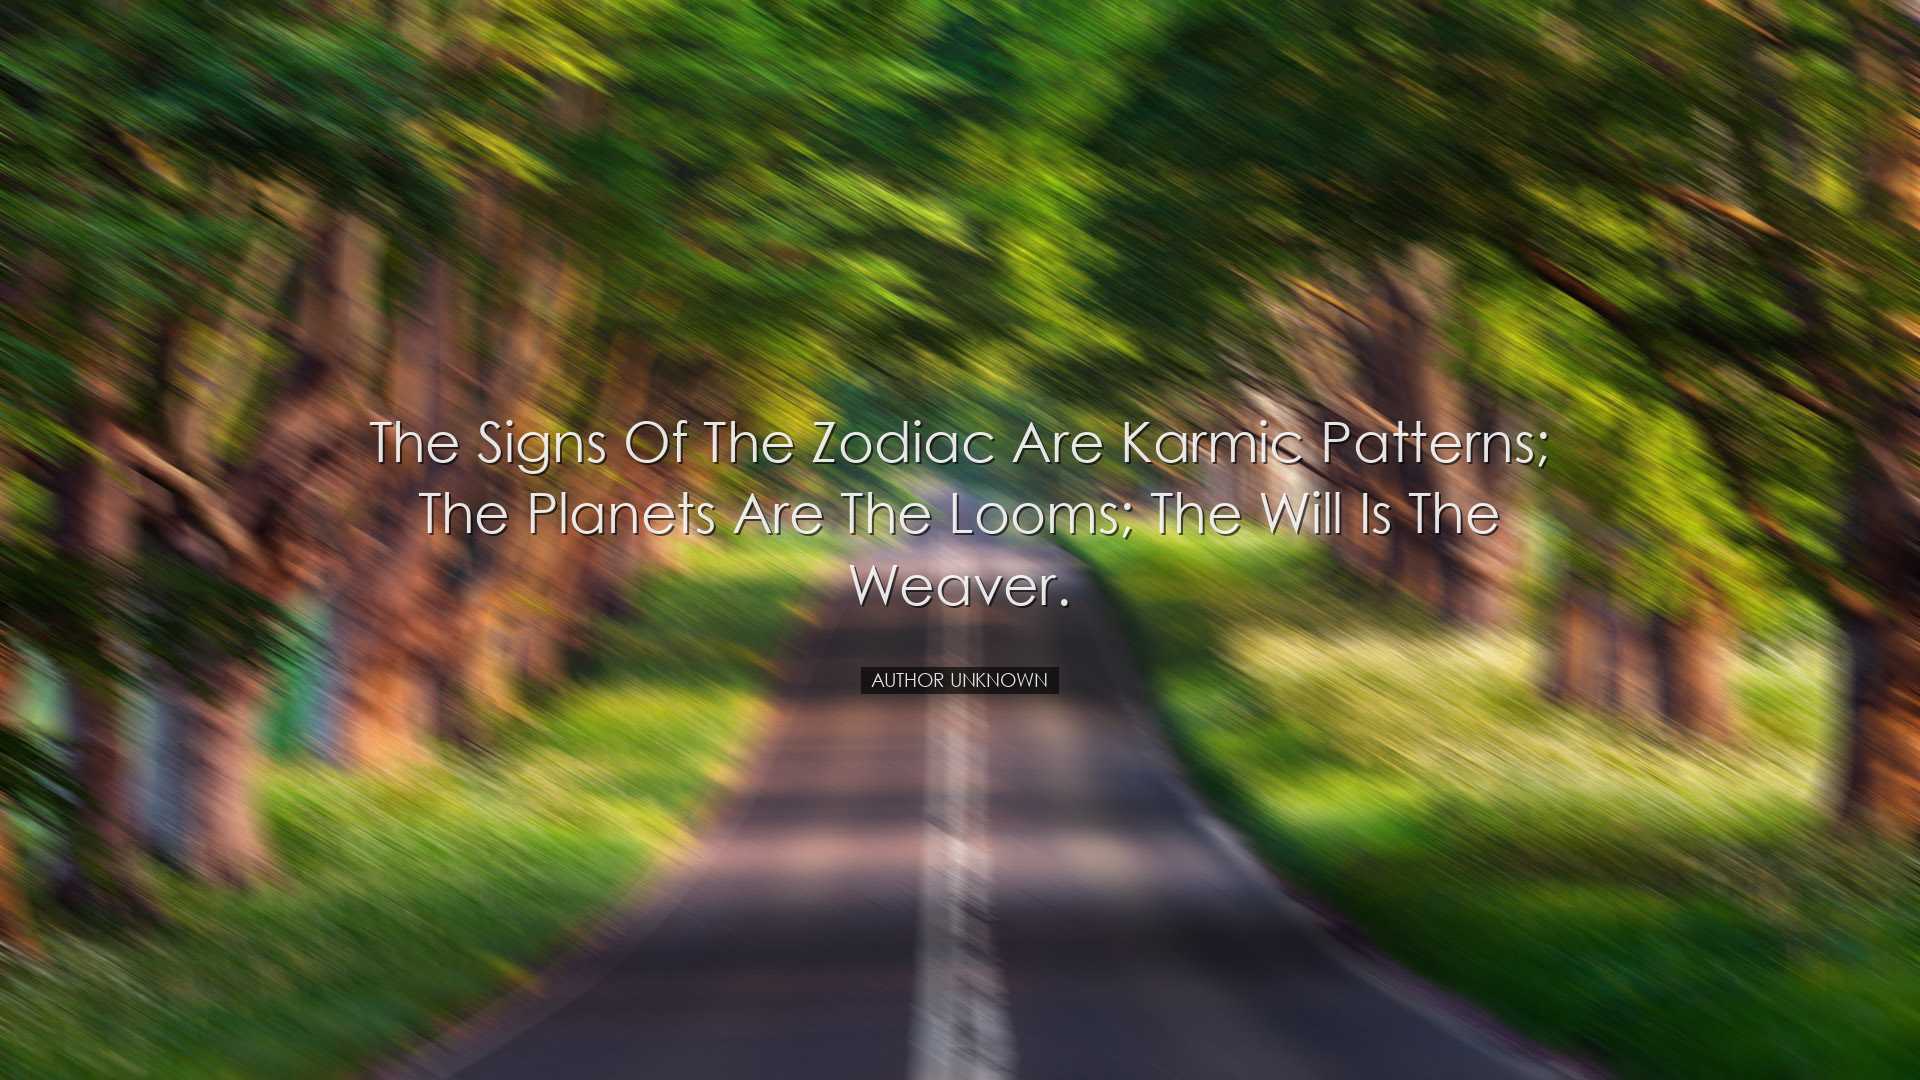 The signs of the zodiac are karmic patterns; the planets are the l